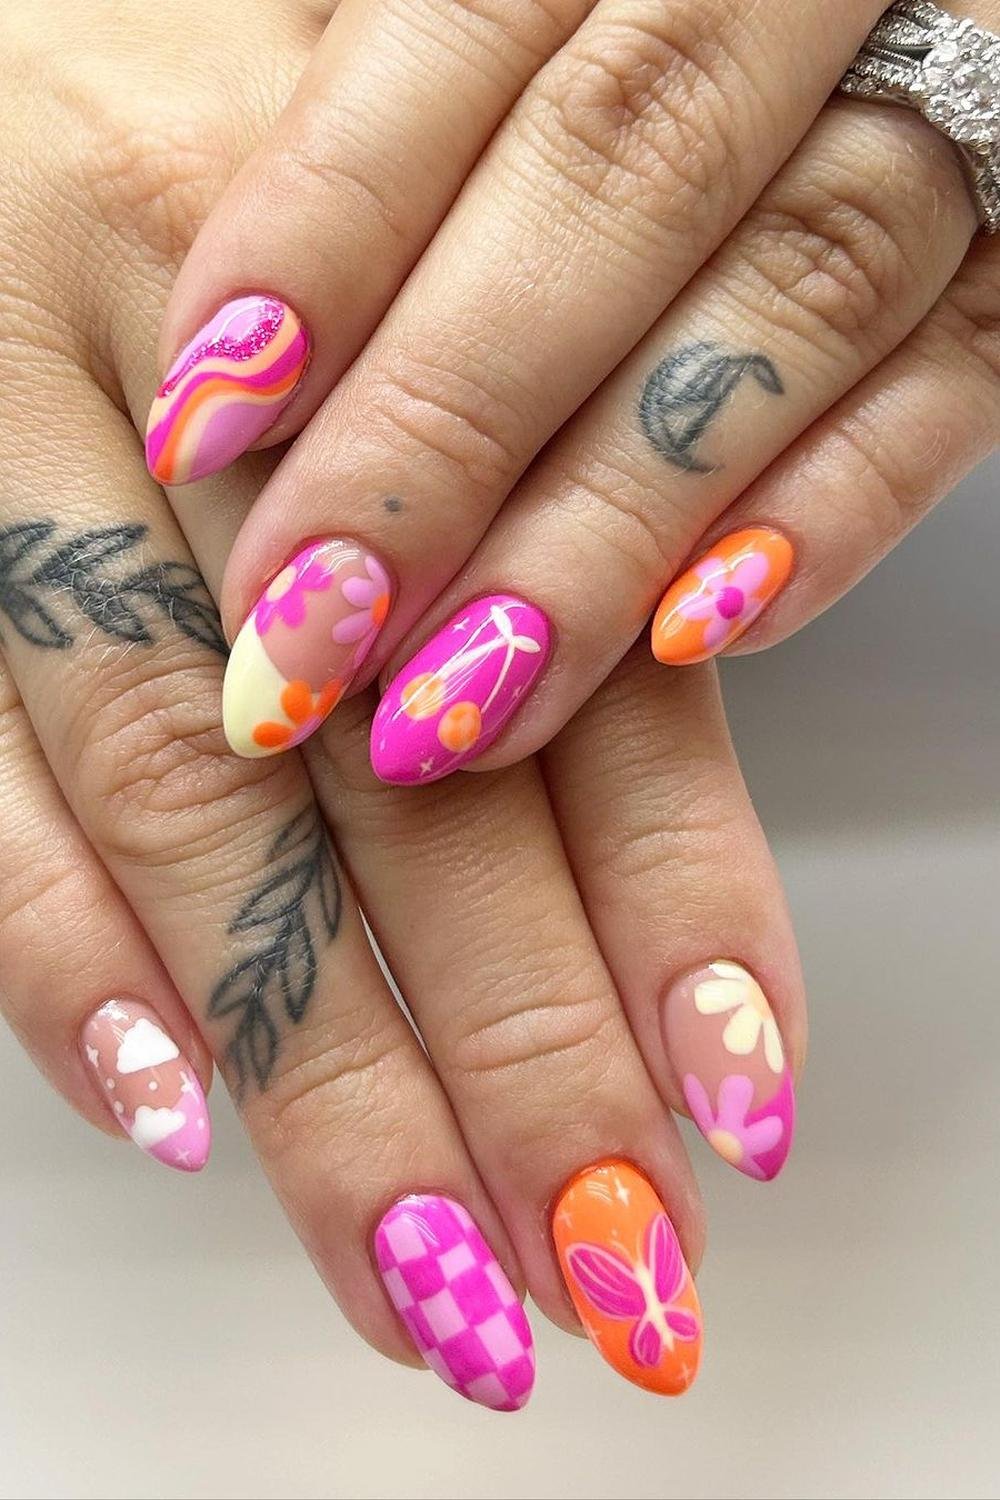 5 - Picture of Pink and Orange Nails